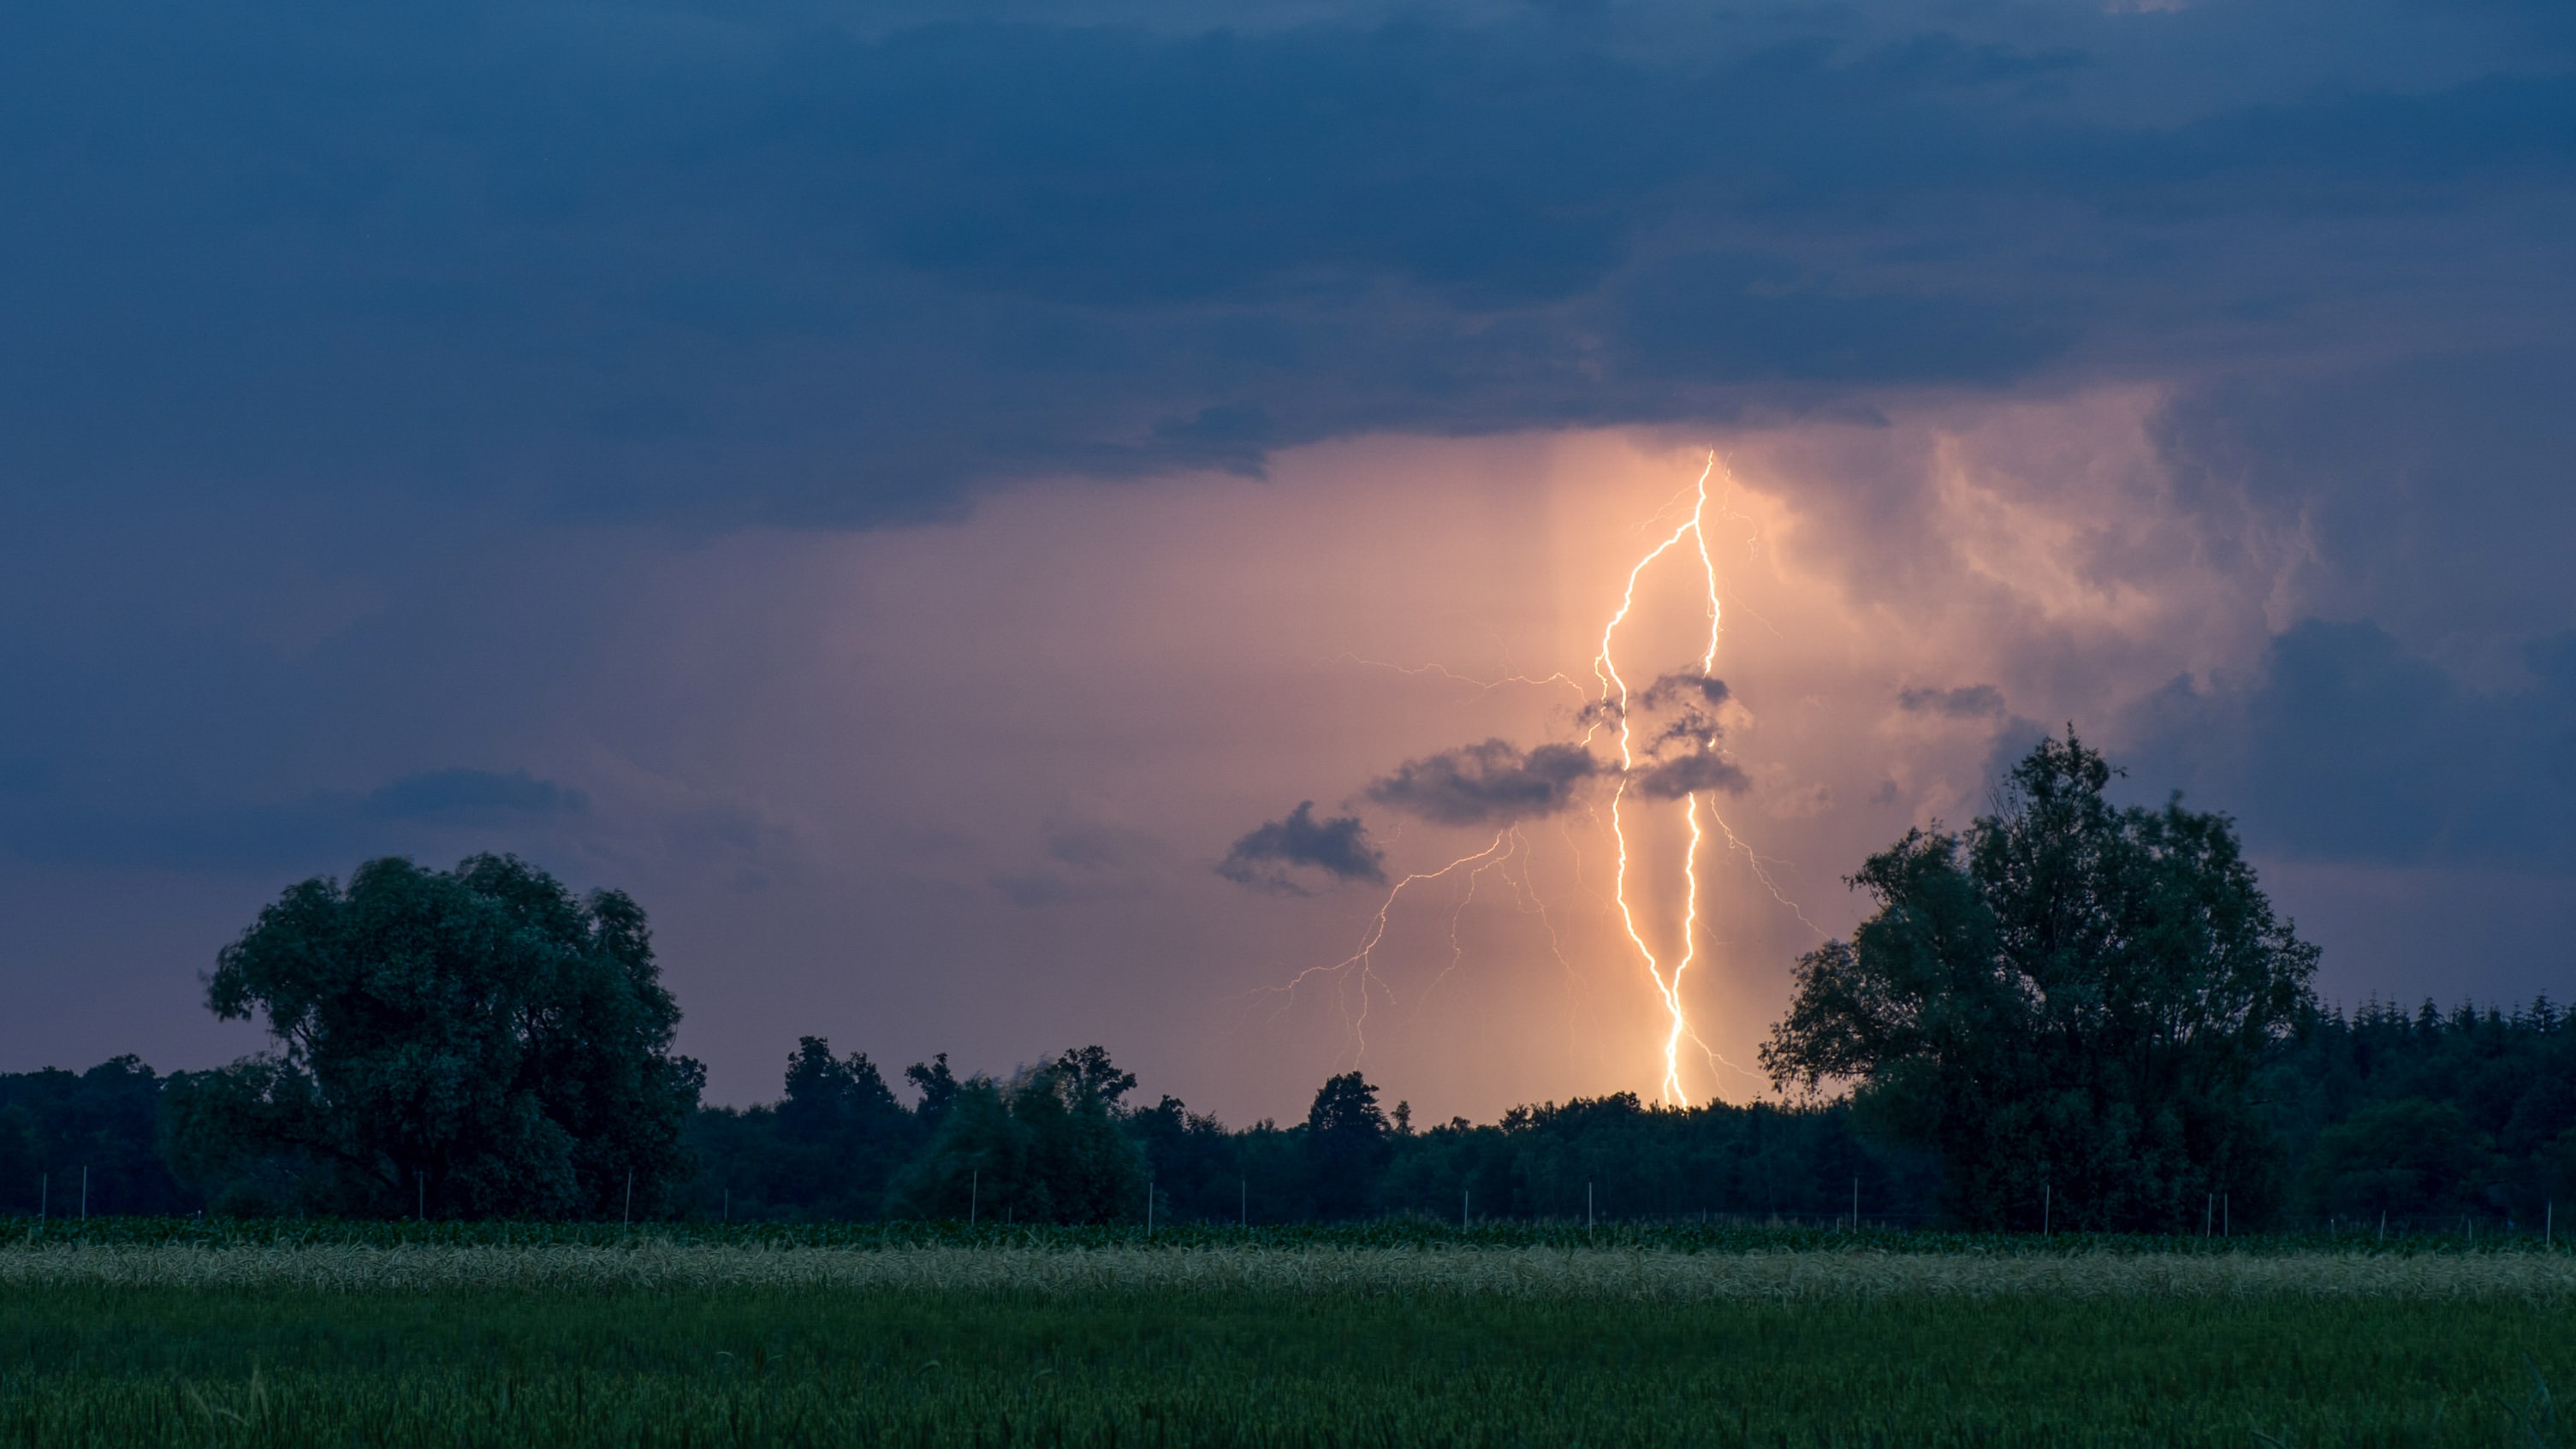 Lightning strikes over a field with trees at night.